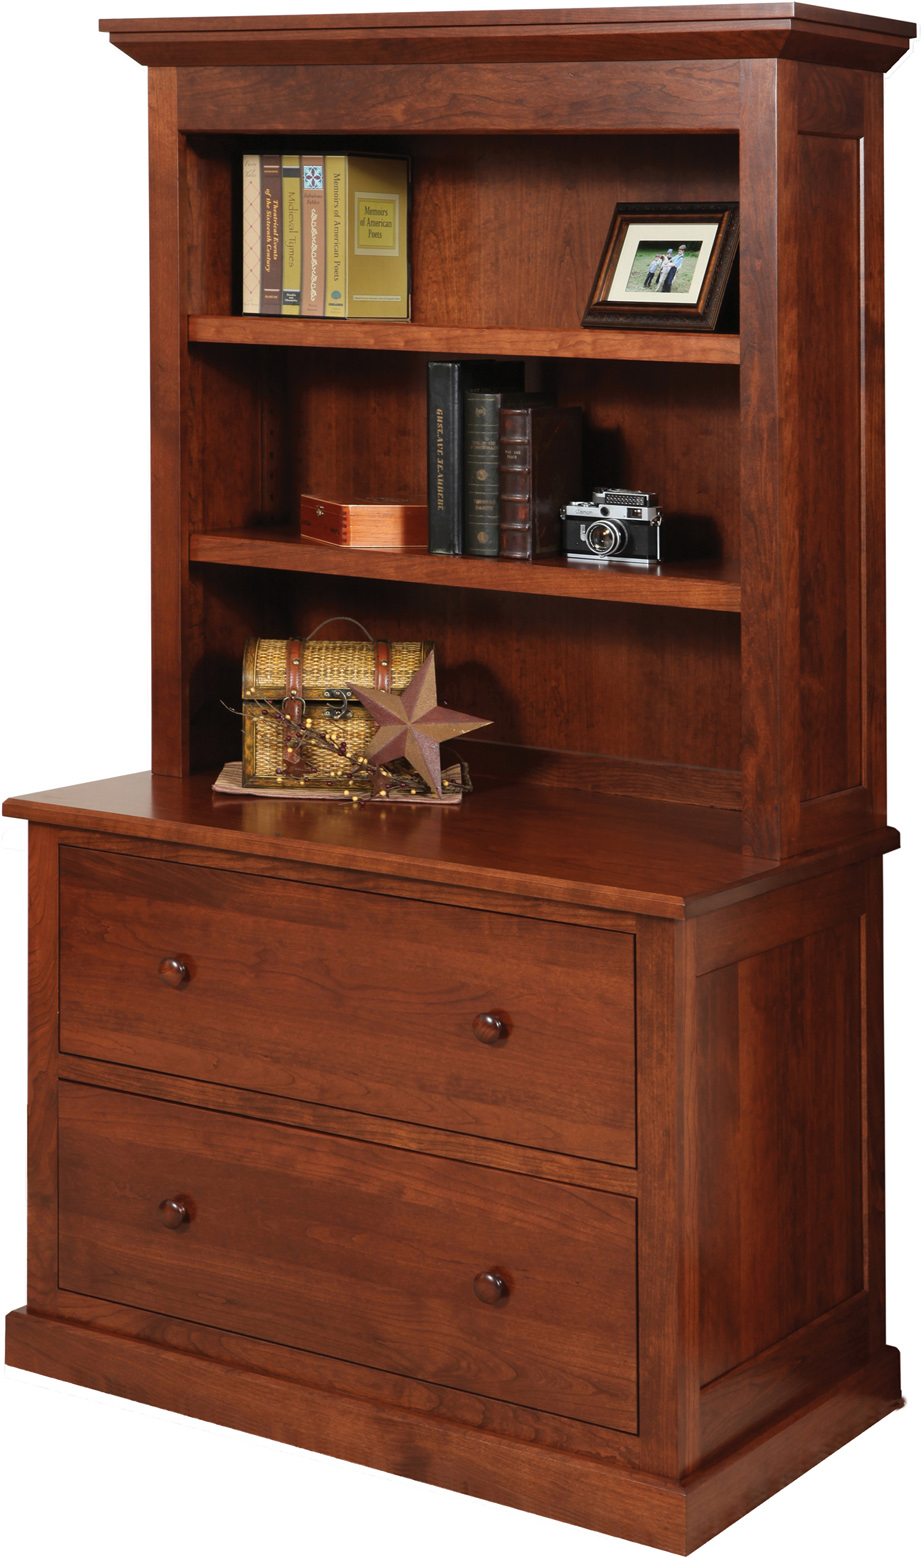 Homestead Lateral File Cabinet With Hutch Amish Homestead Lateral File within measurements 922 X 1558